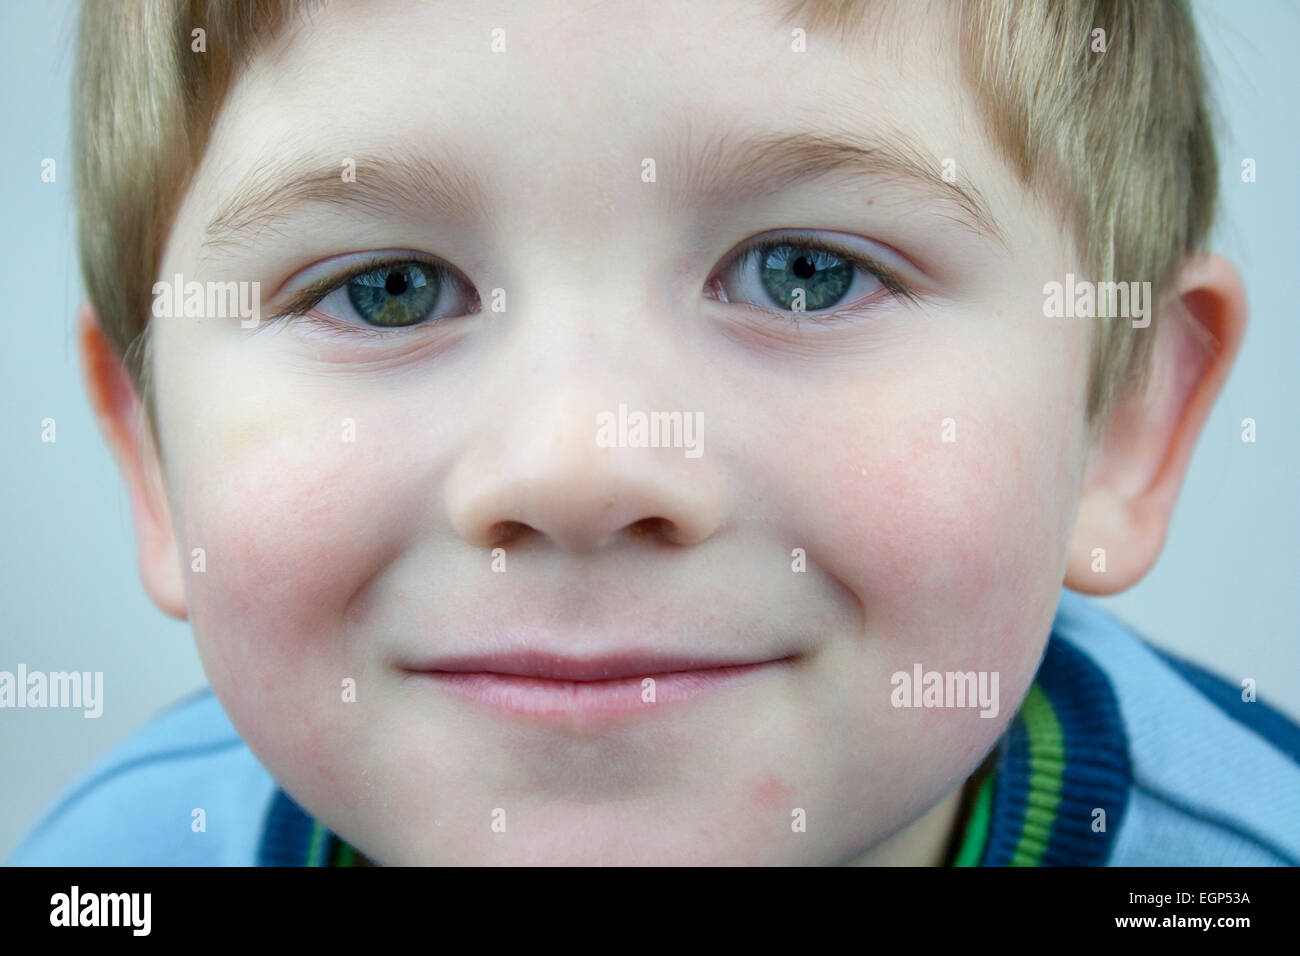 5 year old boy face shots close up expression Stock Photo - Alamy